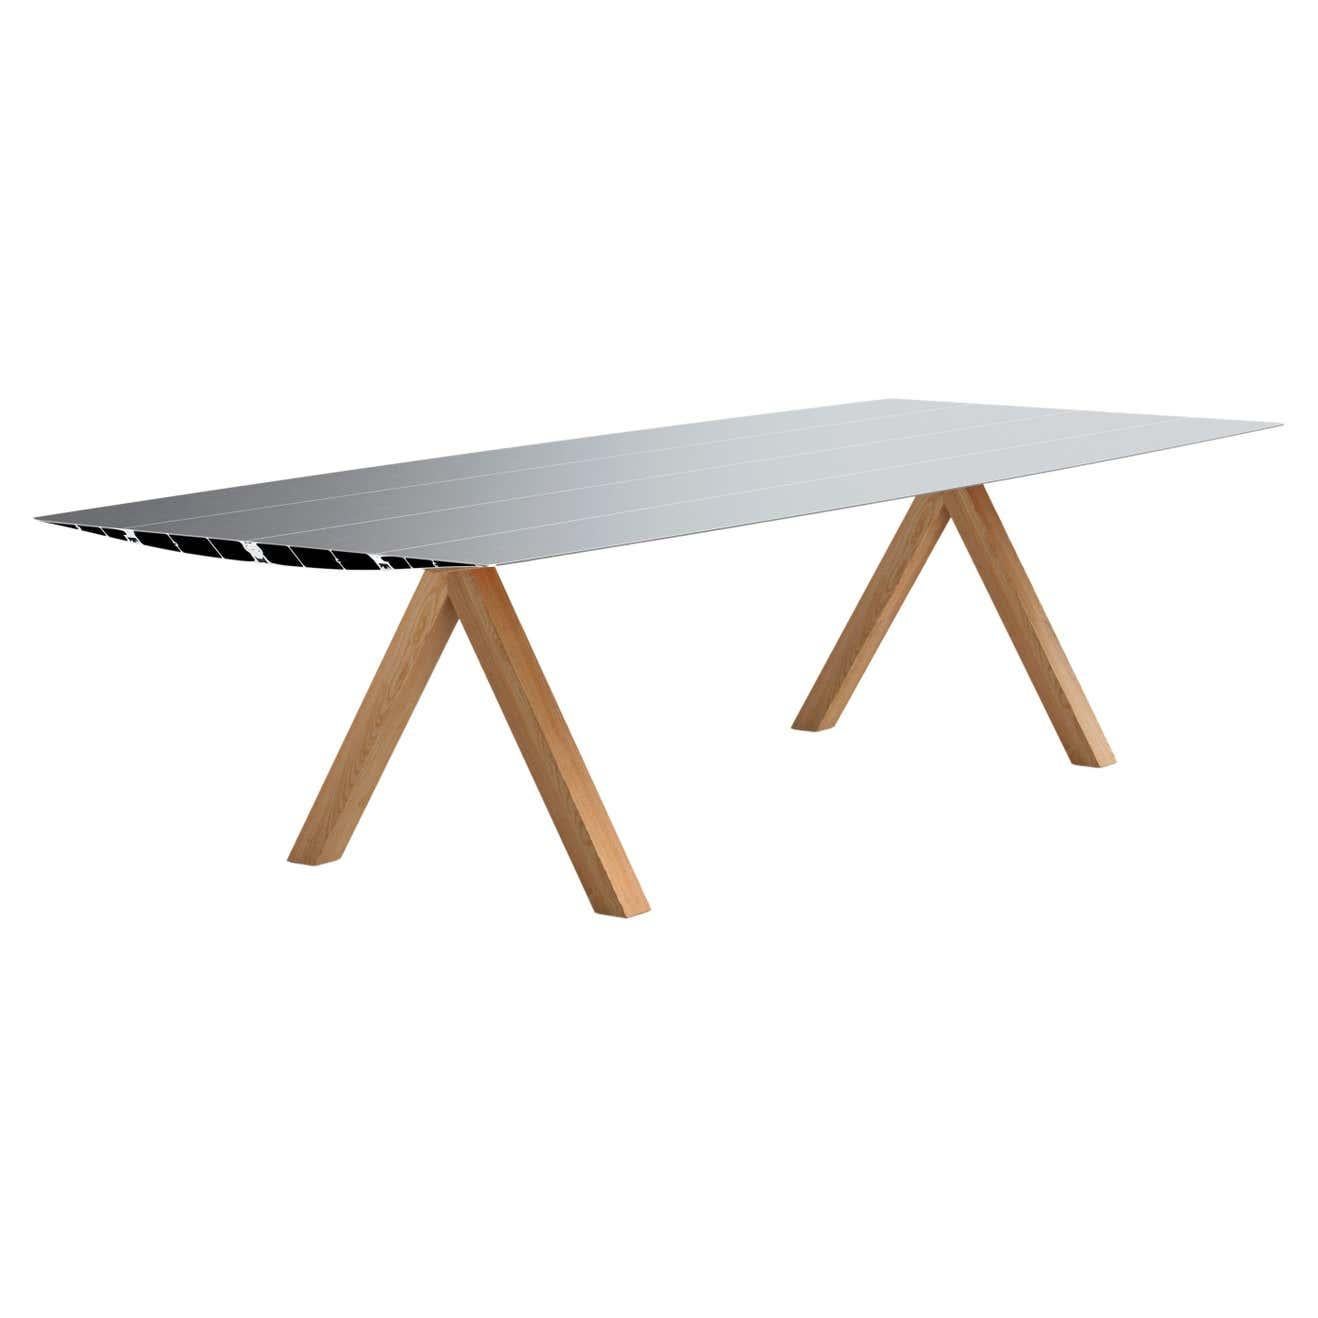 Dinning Table B 120cm x 360 cm Aluminum Anodized Silver Top Wooden legs

Materials: 
Aluminium, oak, ash

Dimensions: 
D 120 cm x W 360 cm x H 74 cm

The Table B, which inaugurated the Extrusions Collection in 2009, can reach up to five